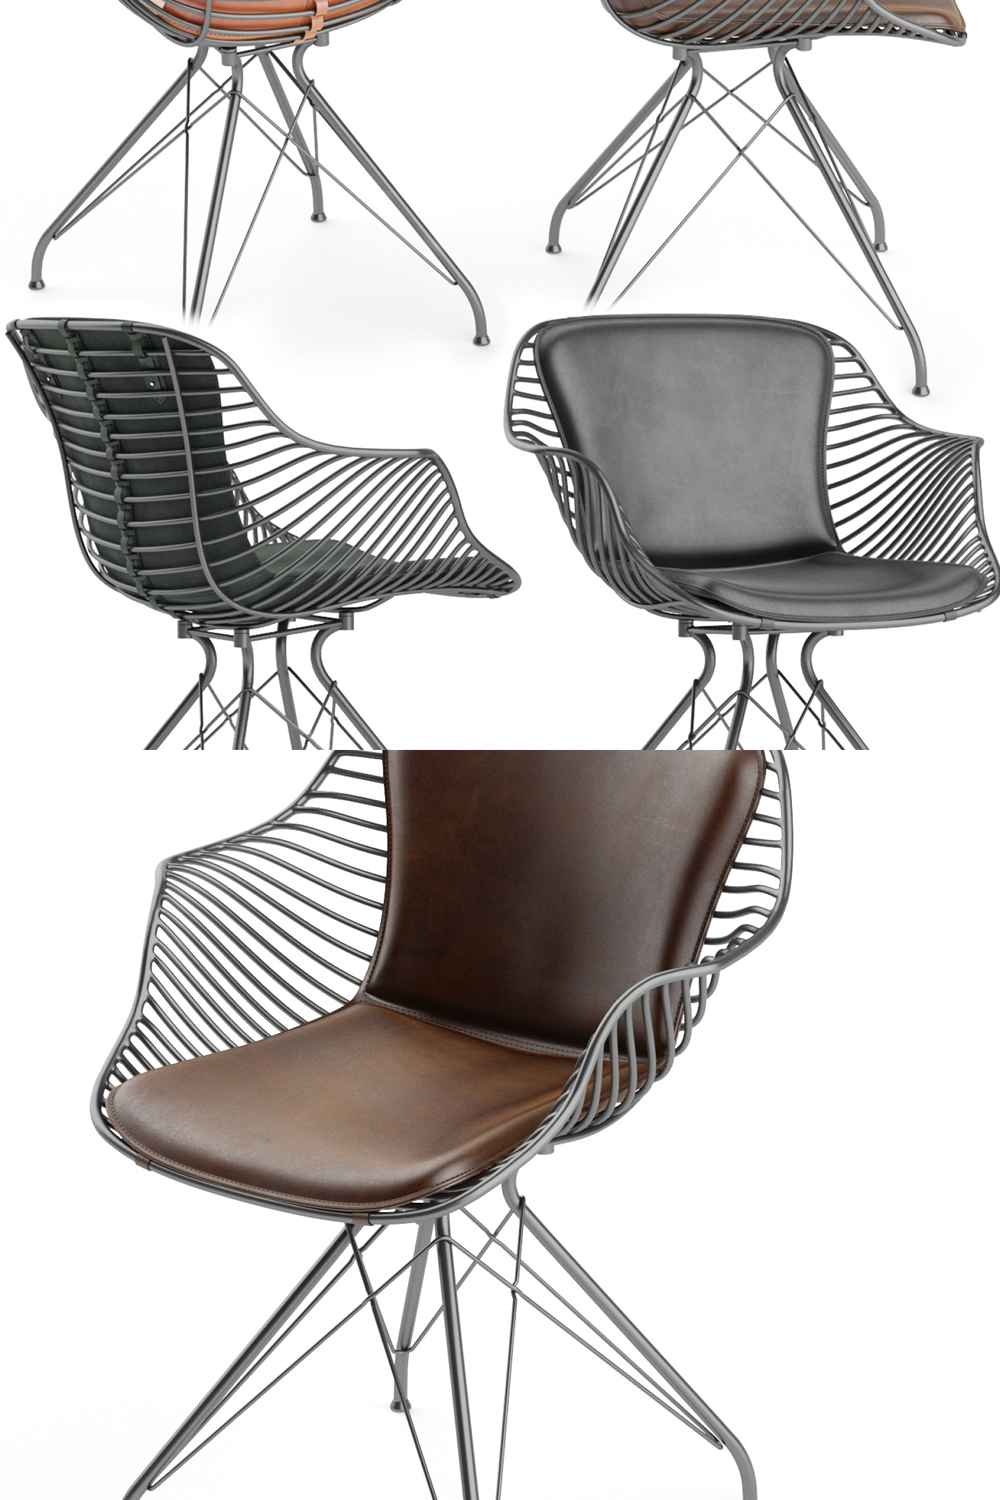 Illustrations wire dining chair of pinterest.